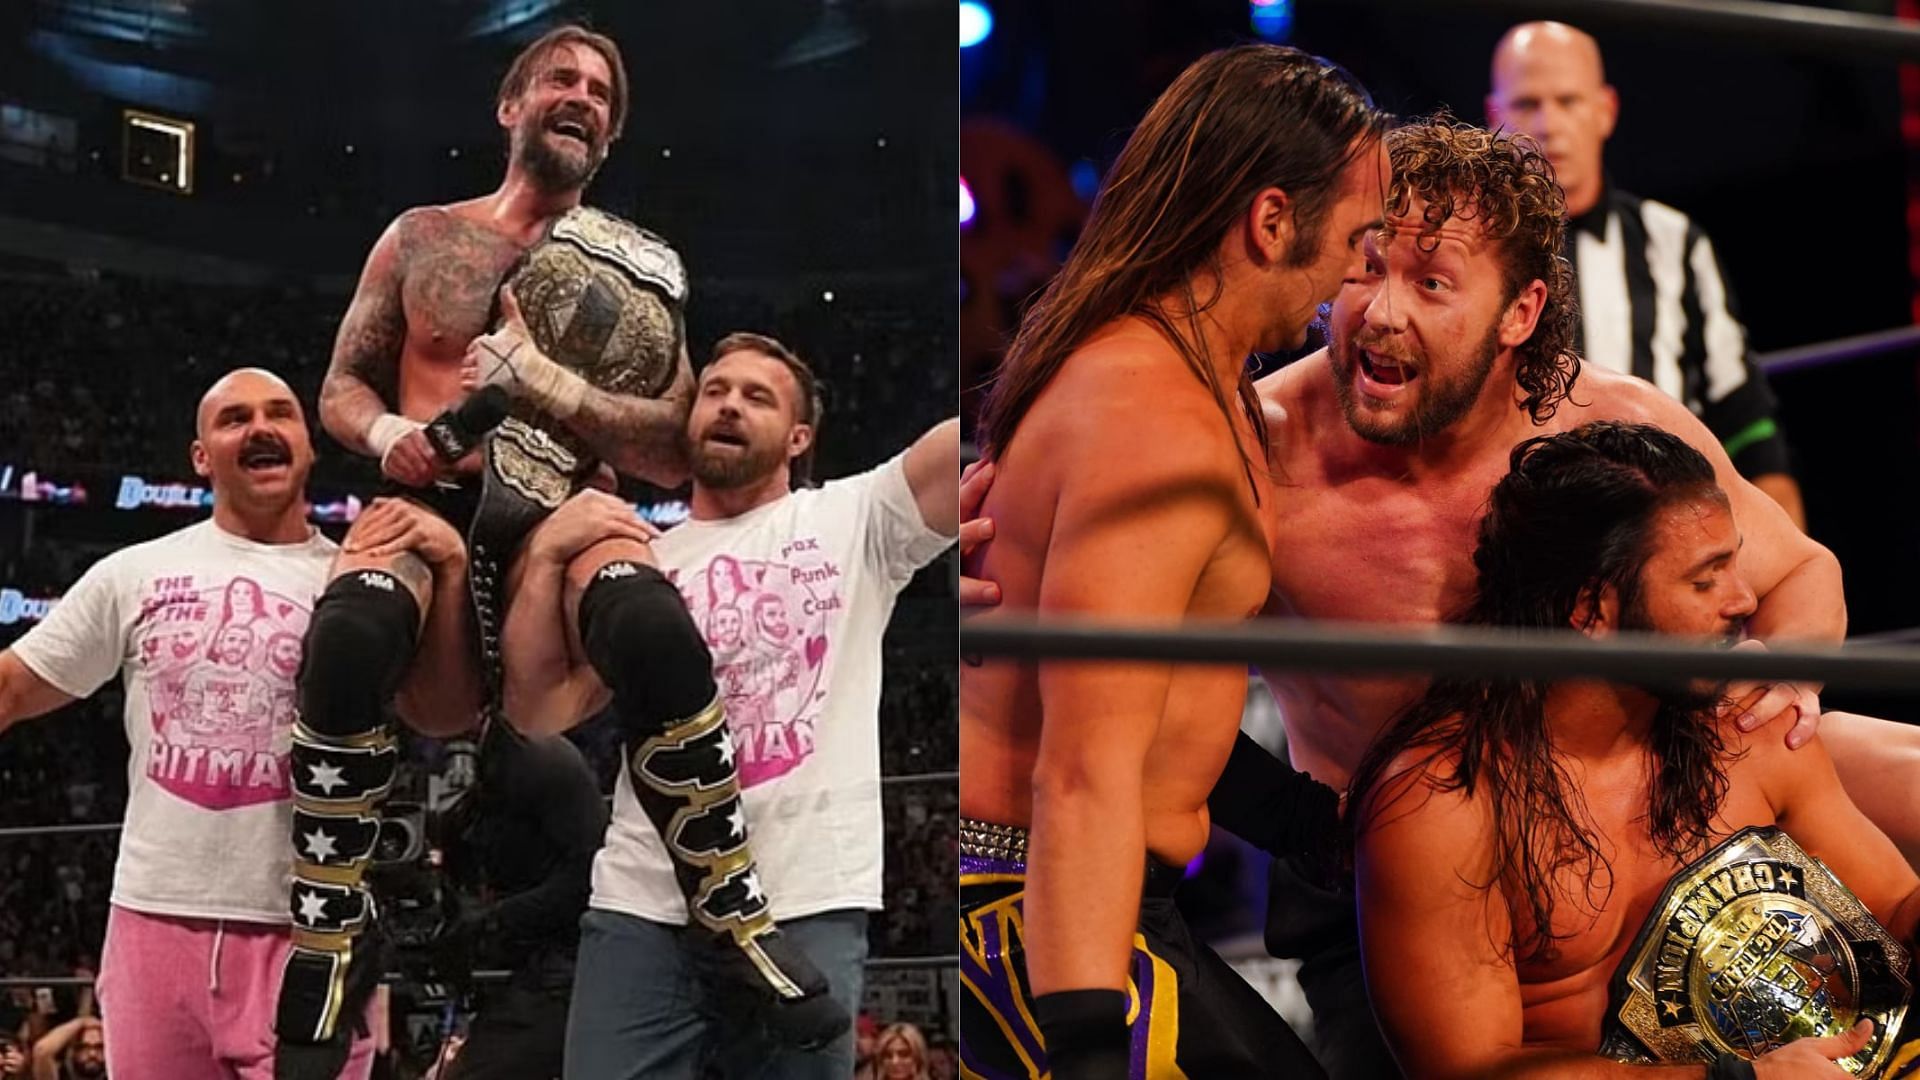 Could the two factions come clashing in AEW soon?